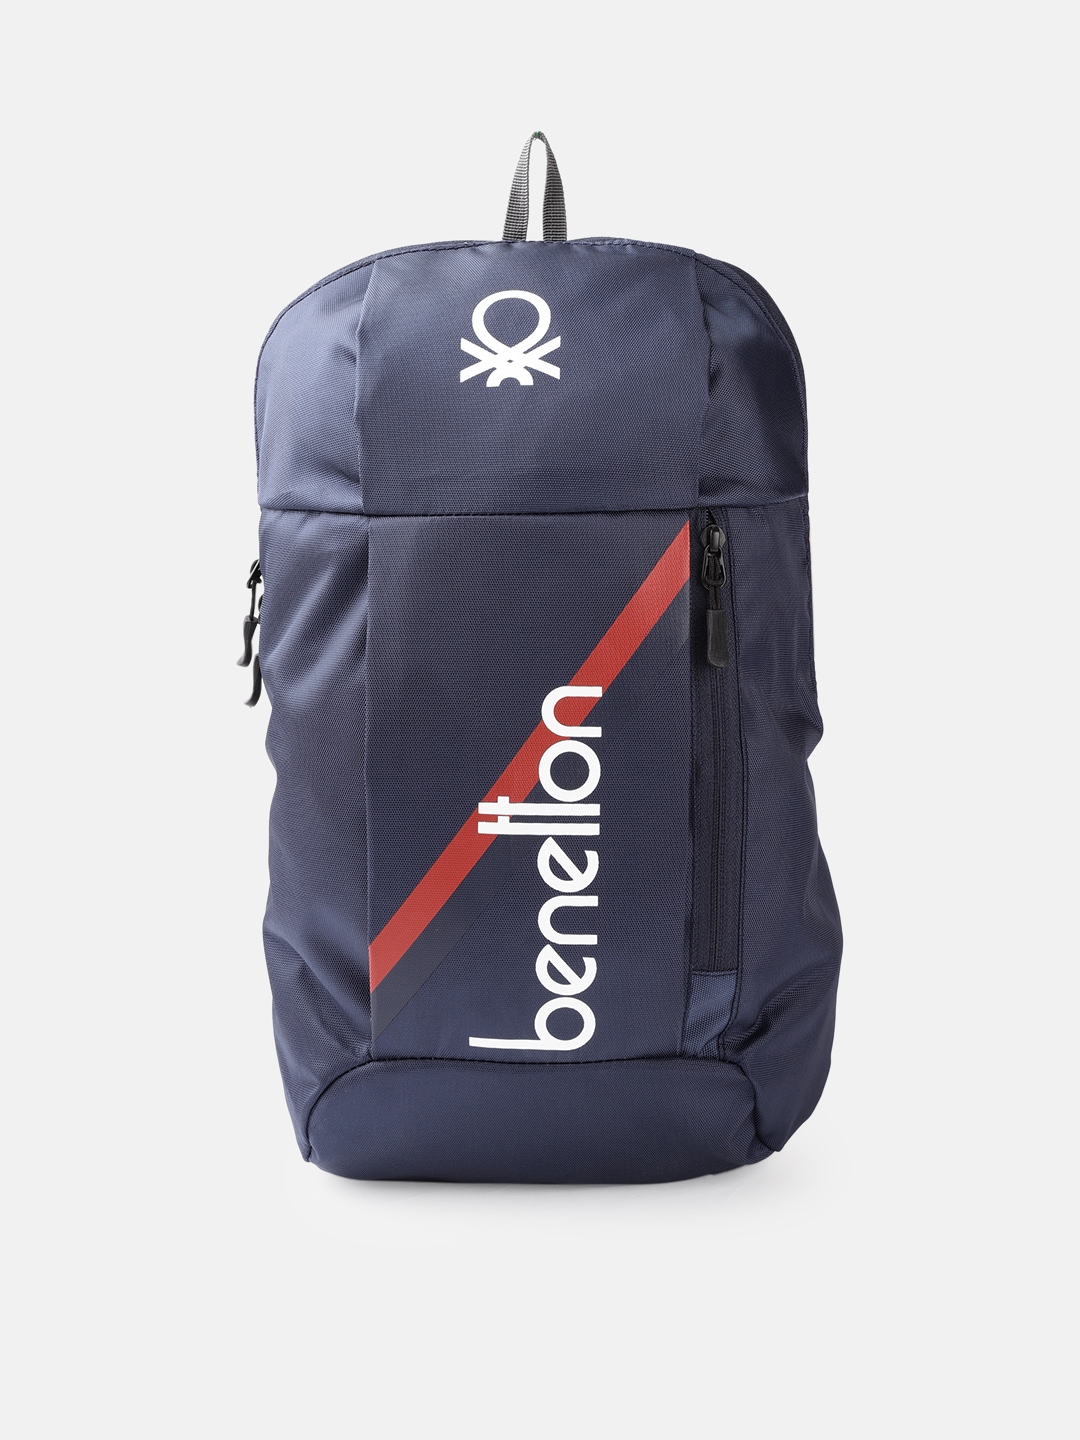 United Colors of Benetton Unisex Navy Blue & White Brand Logo Print Backpack 12 L Price in India